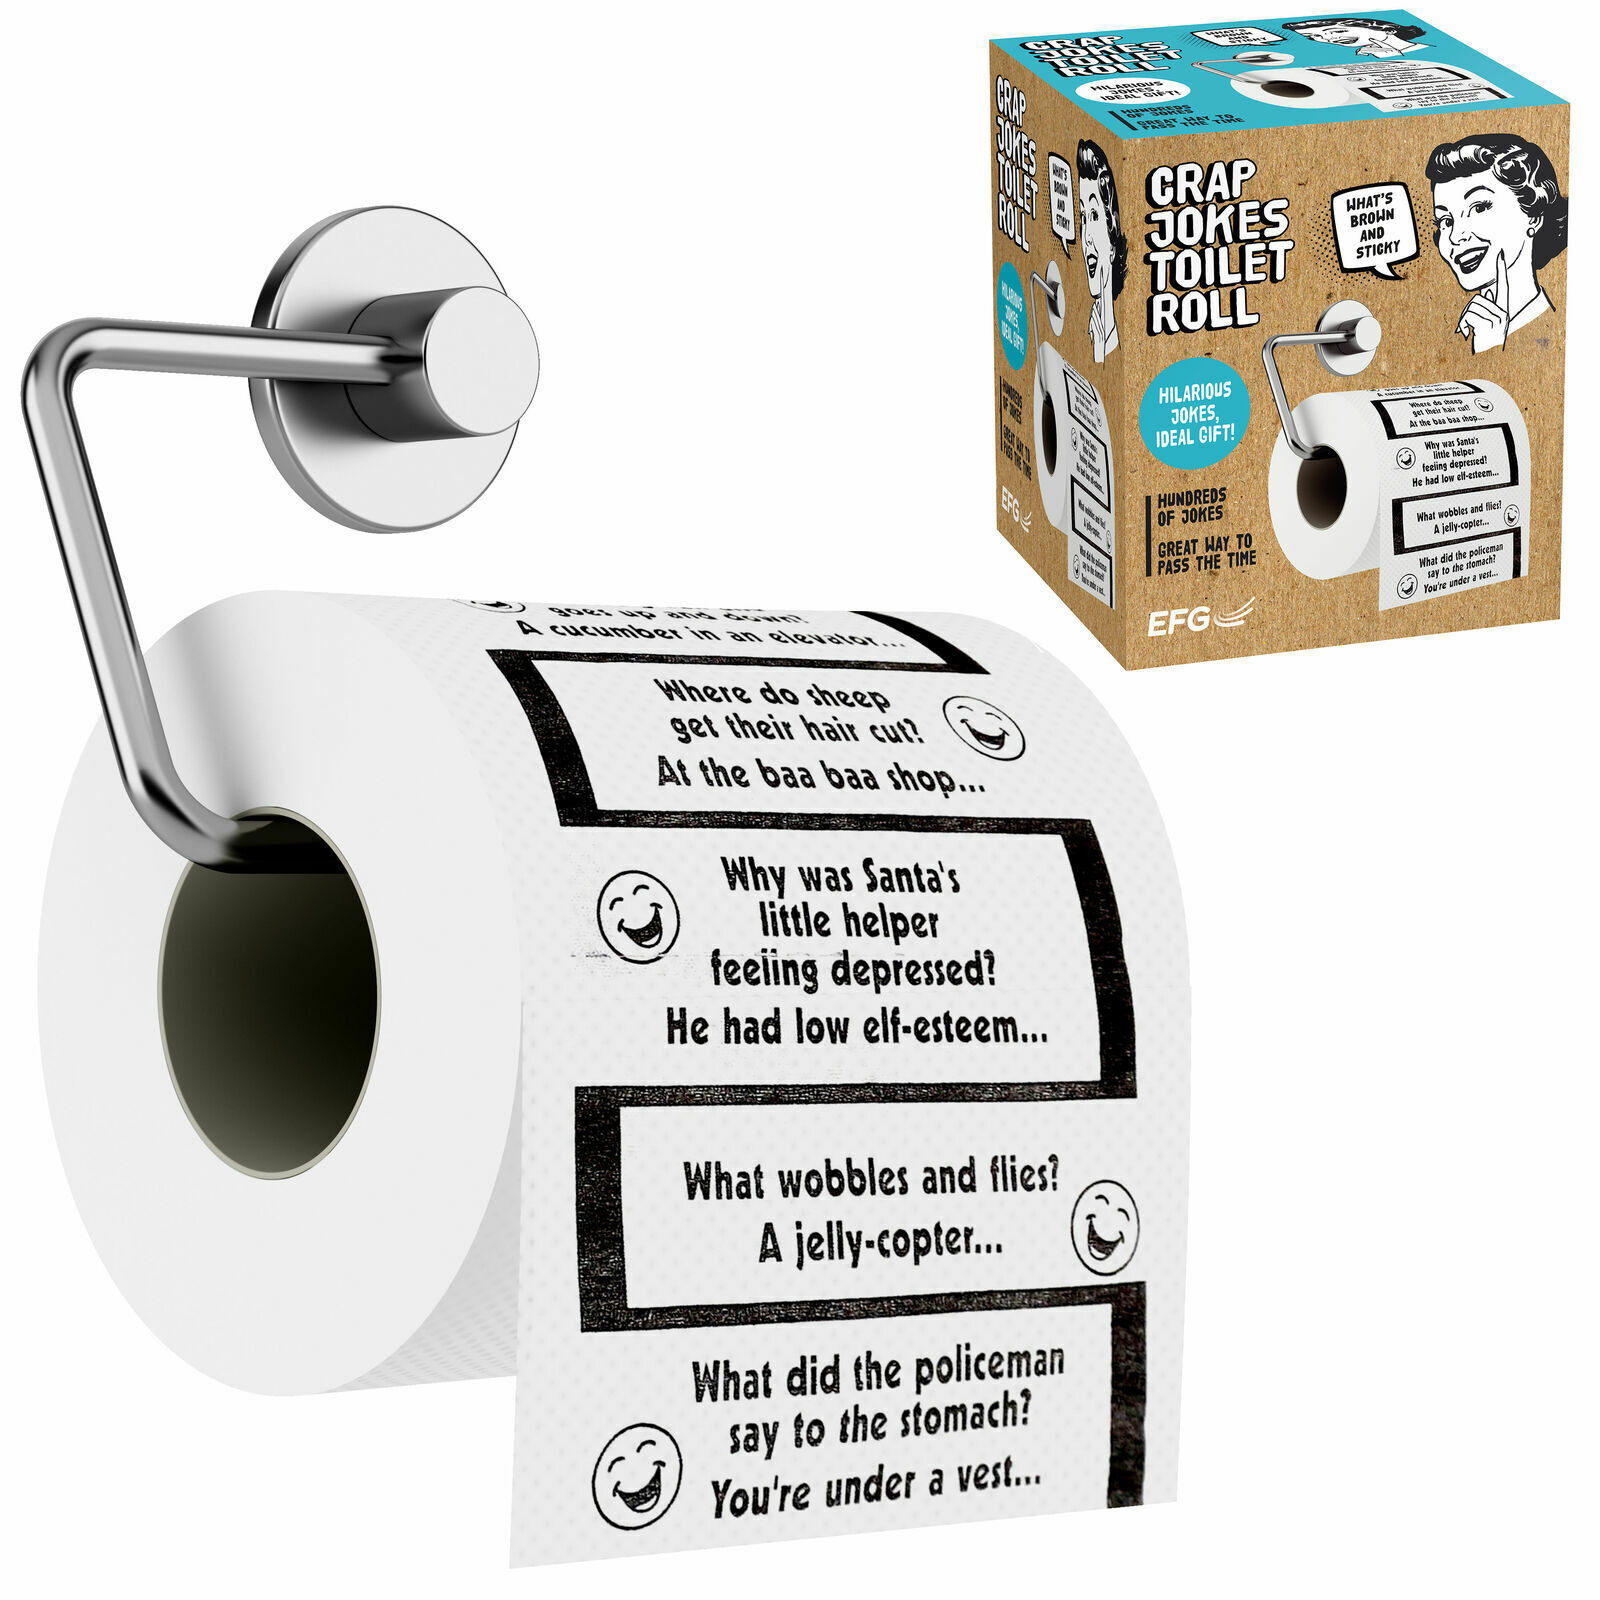 A box of Crap Jokes Toilet roll and the roll itself, with jokes like &quot;What did the policeman say to the stomach? You&#x27;re under a vest&quot;